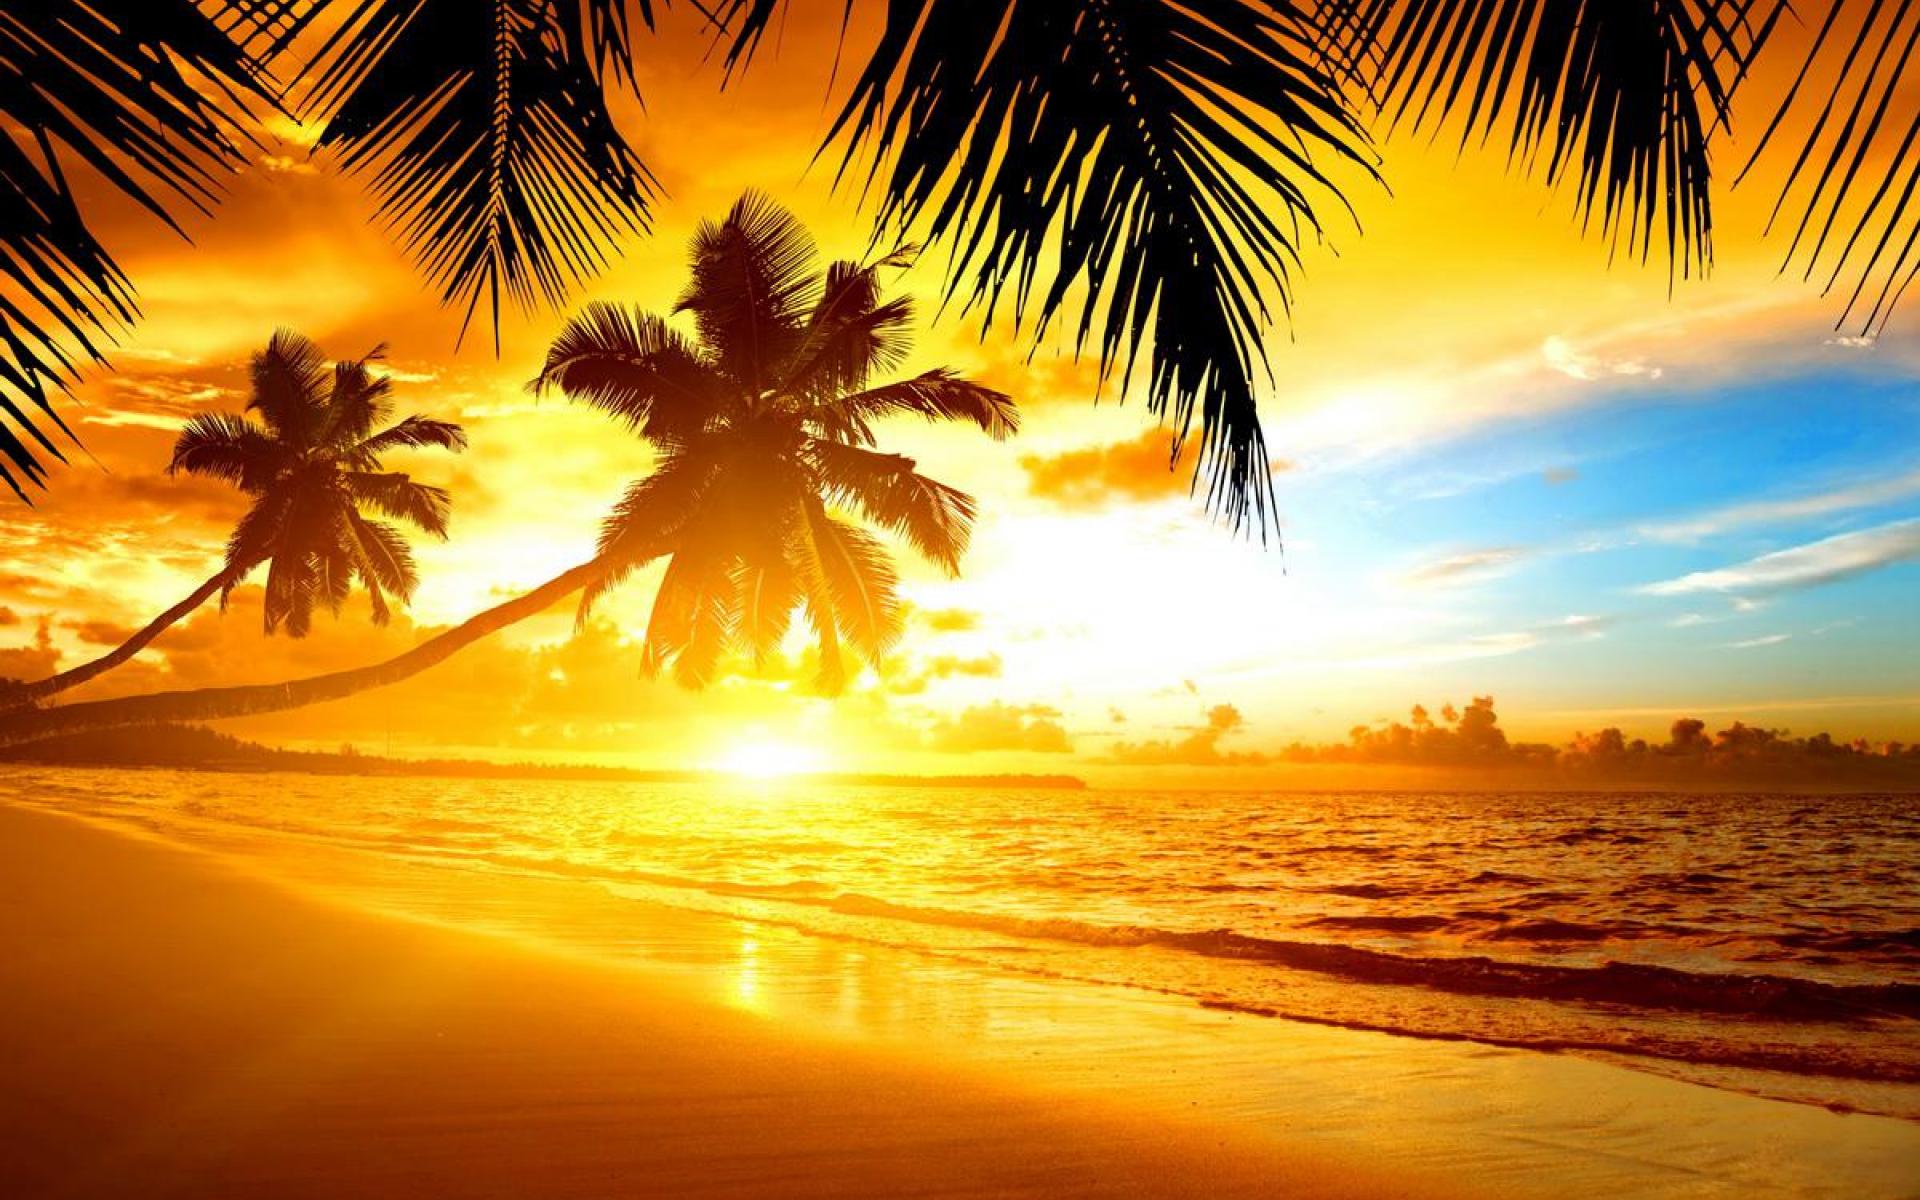 Tropical Island Sunset HD Wallpaper Background Image